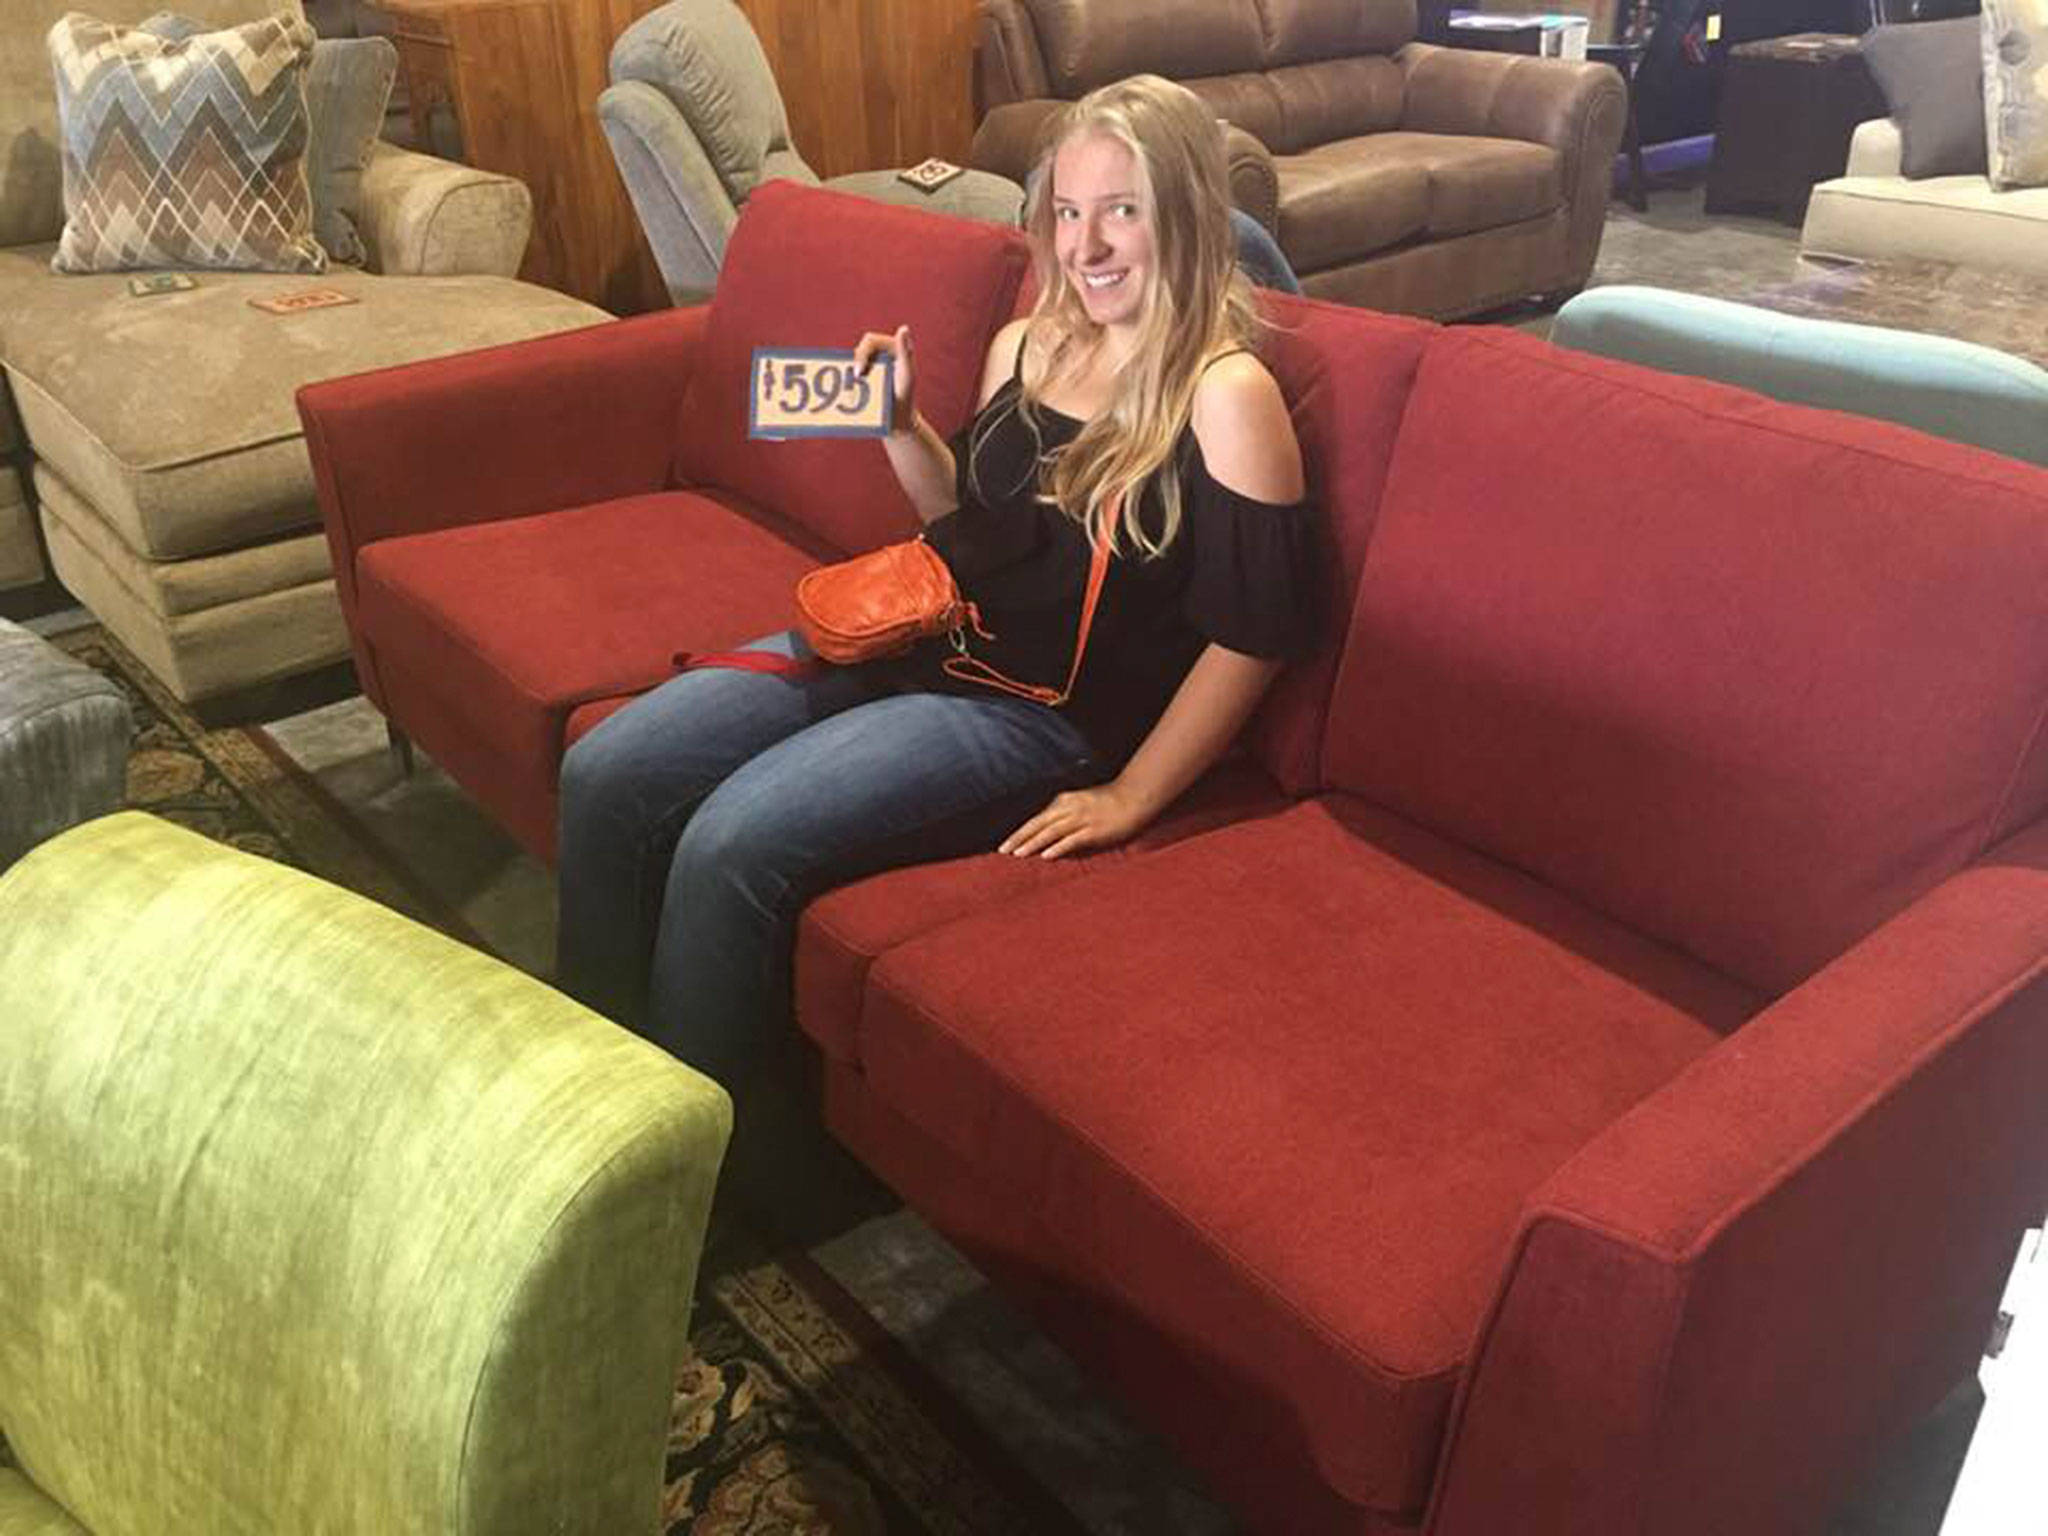 The “Night at the Museum” fundraiser event on Sunday, Aug. 12, is raising monies for the Robby Streett Legacy Fund to purchase new furniture for the Sequim High School Library, in honor of Robby Streett. Annie Armstrong, one of the organizers of the event sits on a couch at The Warehouse in Port Angeles in search of new furniture. Submitted photo